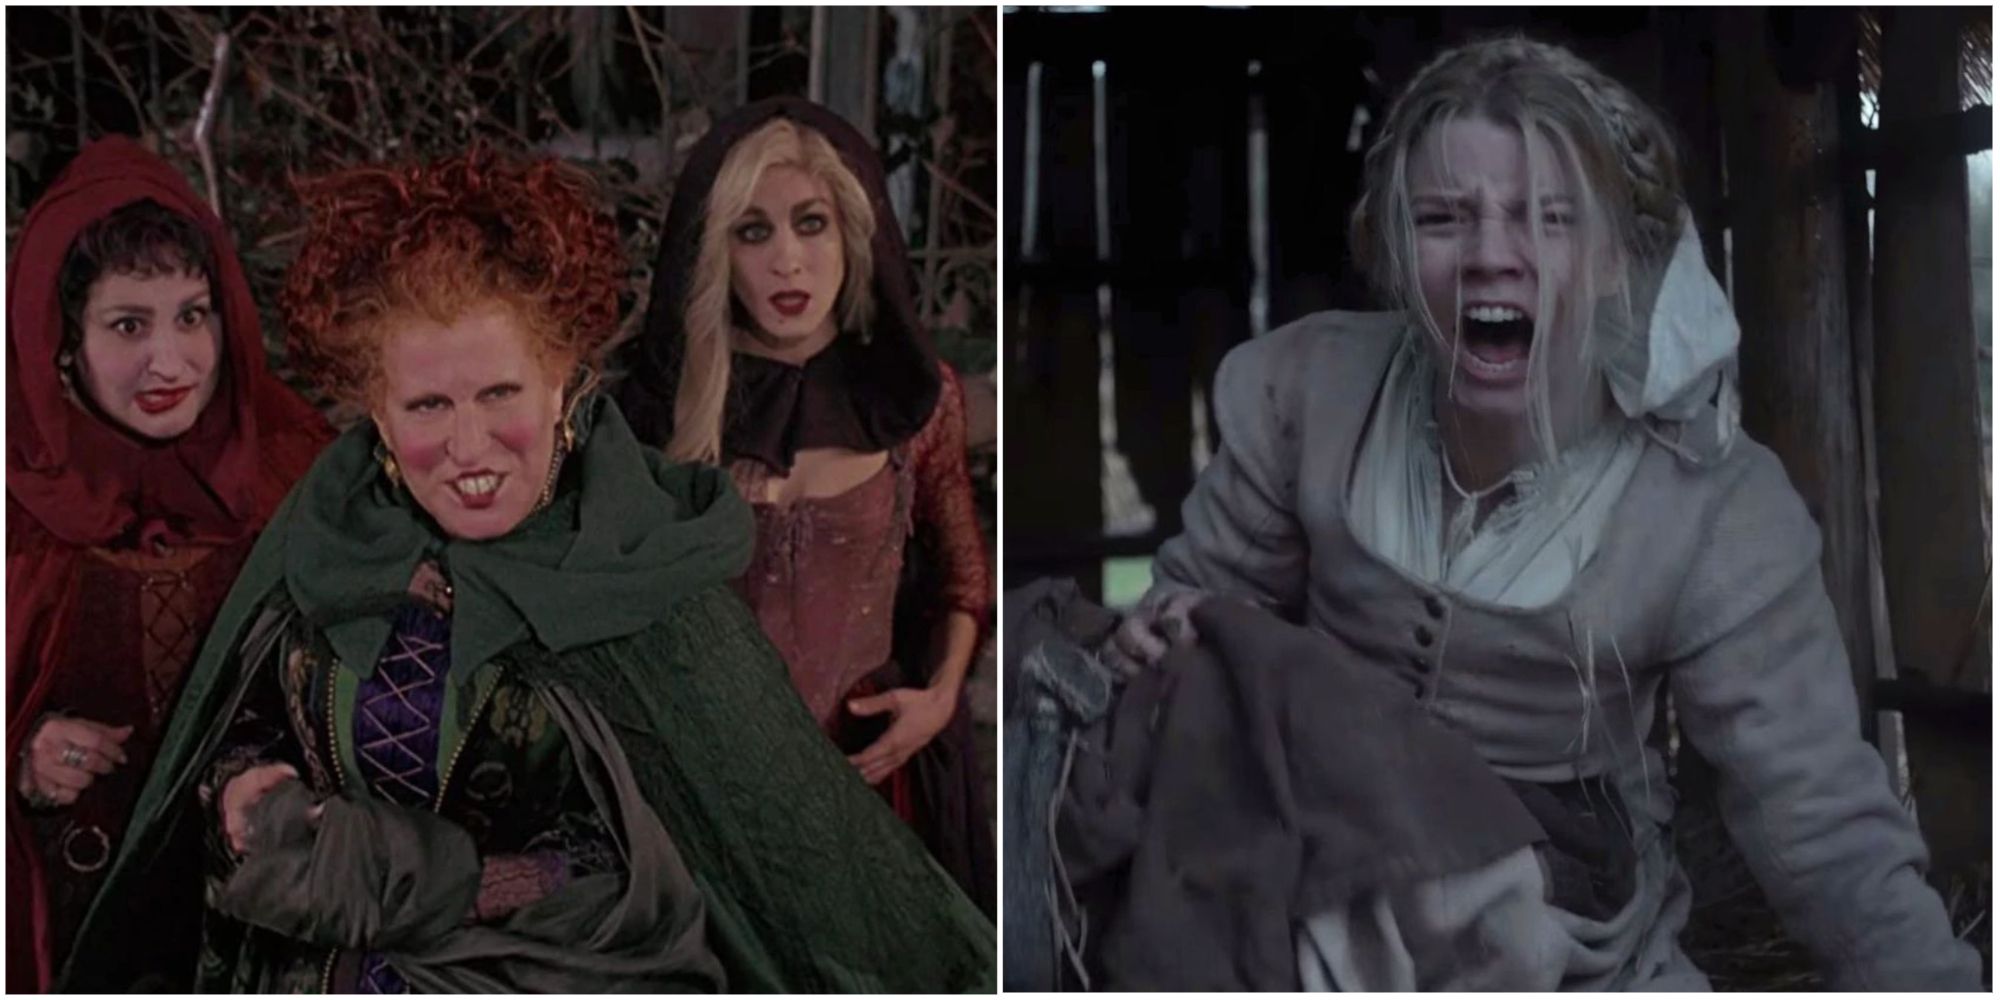 Best witch movies, split image of the Sanderson sisters in Hocus Pocus and Anya Taylor-Joy in The Witch 